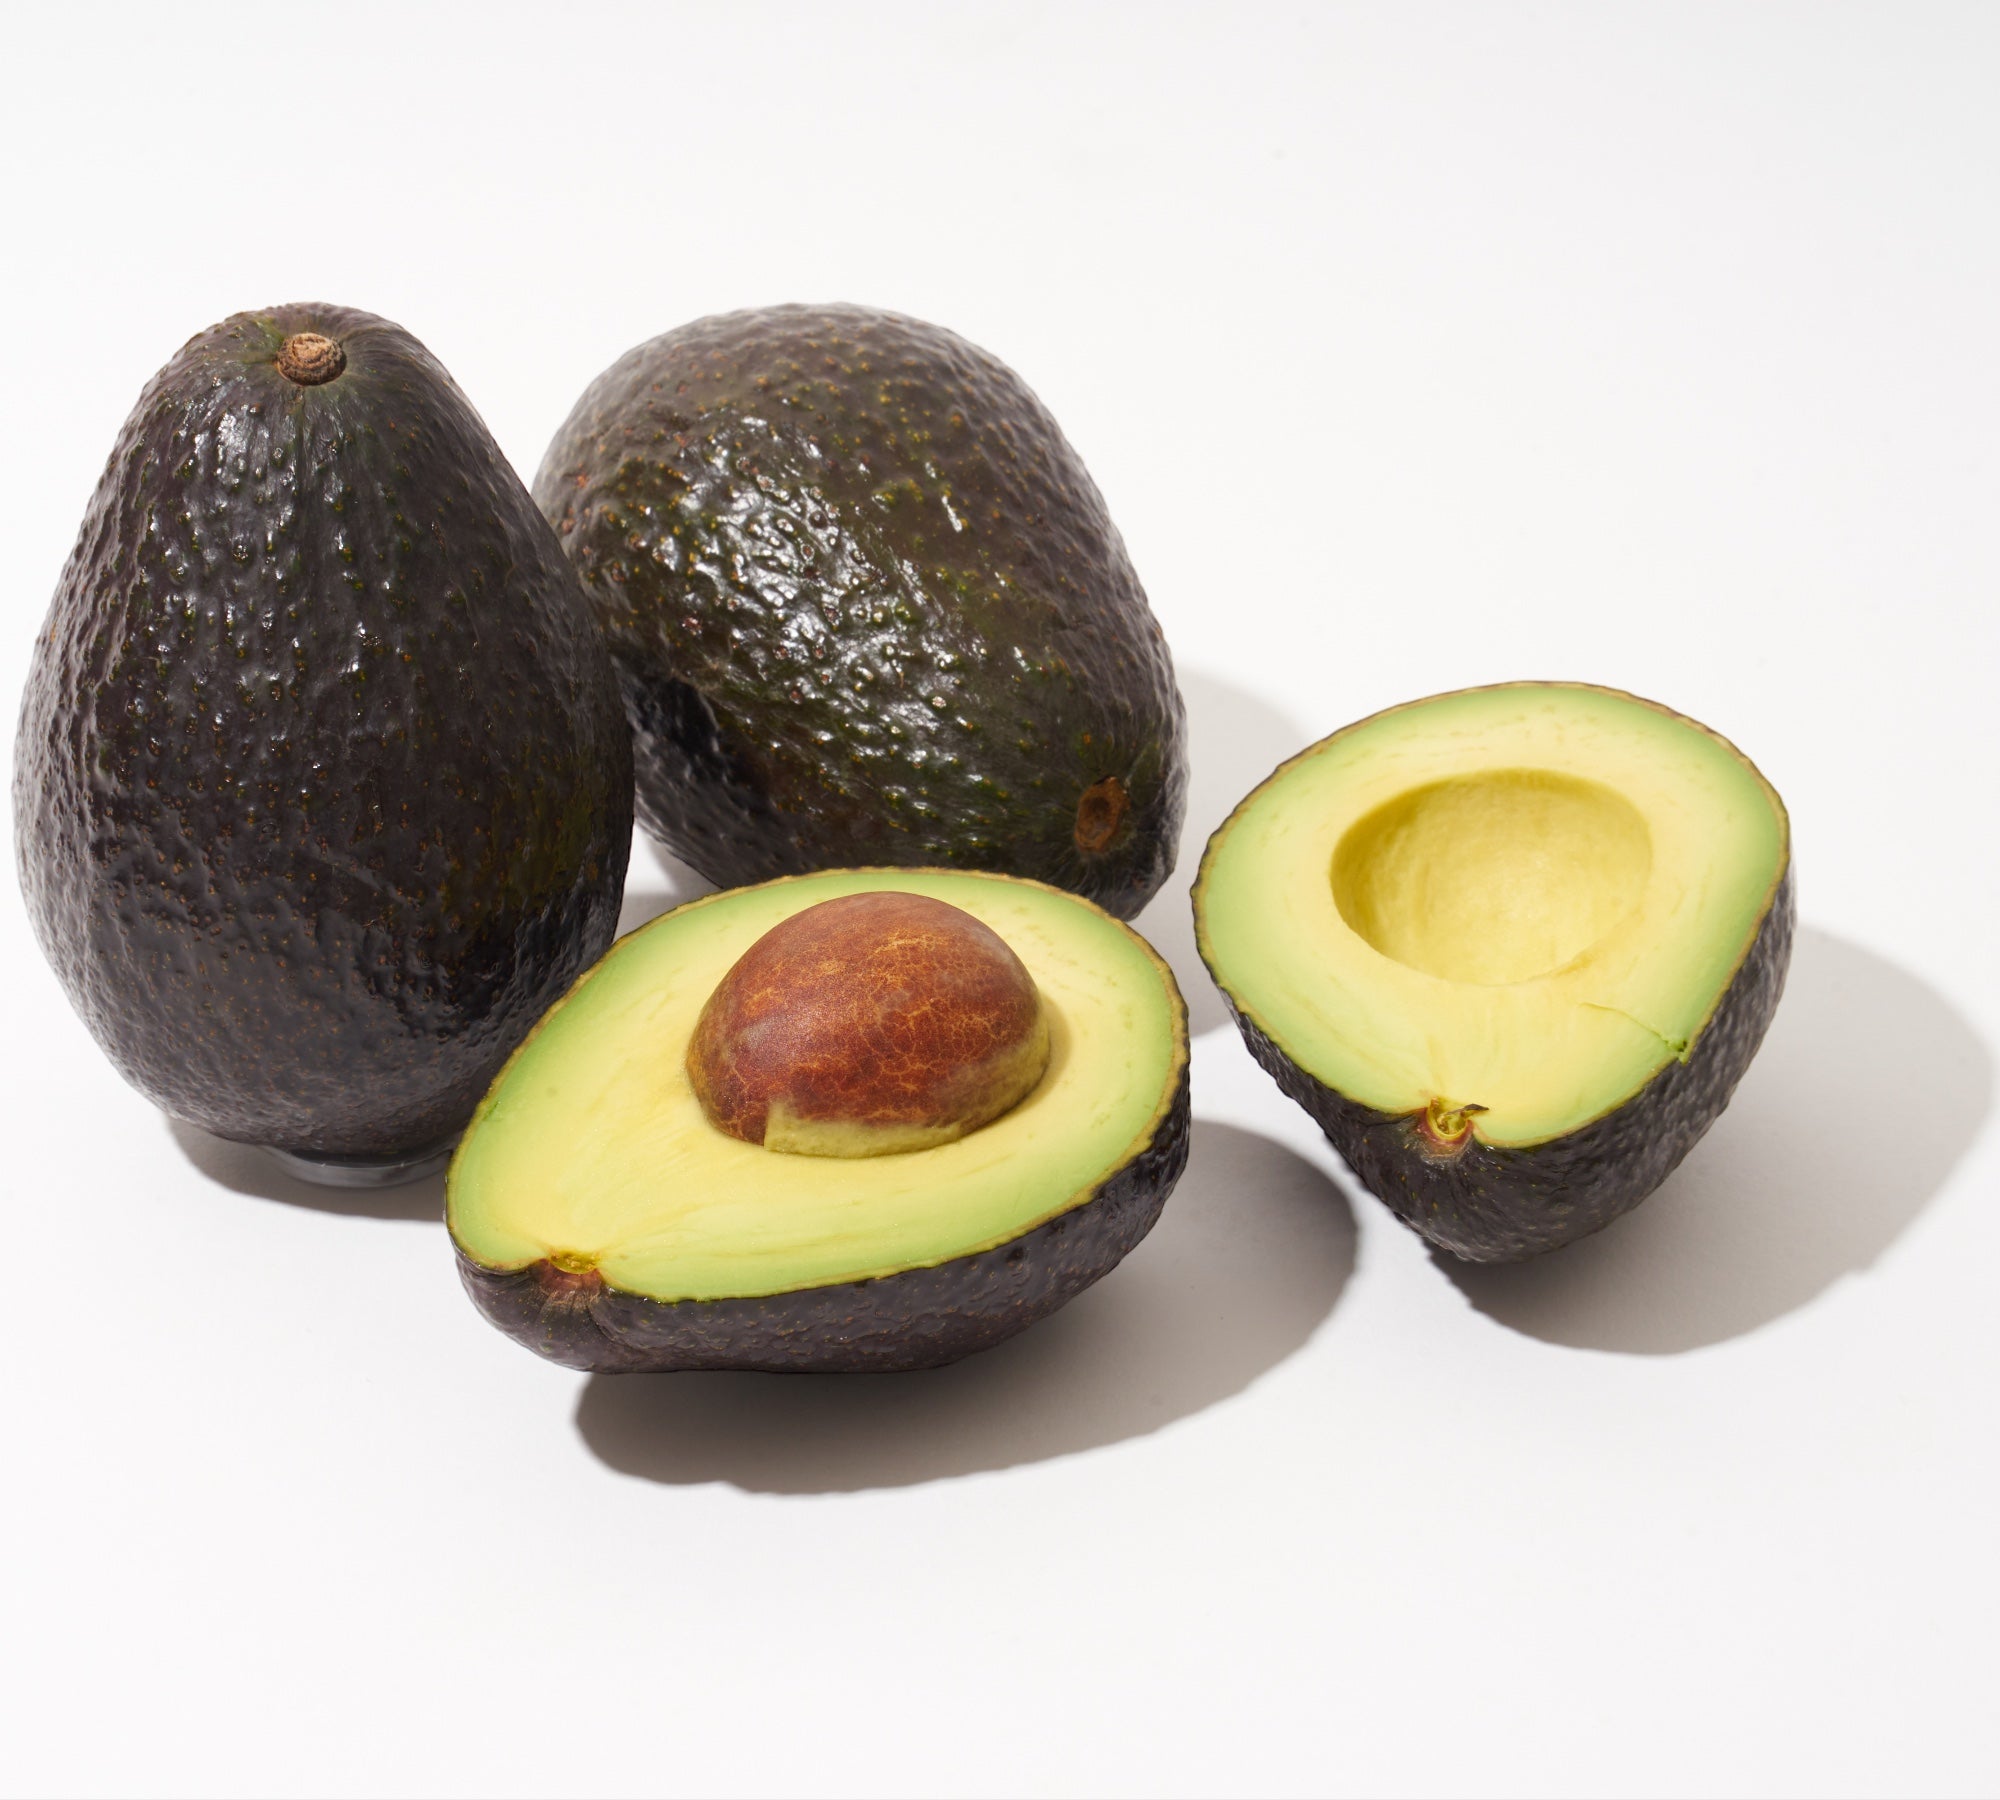 3 Avocados - 1 open in half - Davocadoguy Avocados are the perfect fix for Potassium daily intake. Keep muscle cramps away. Discover all of the benefits of adding avocados to your daily diet!